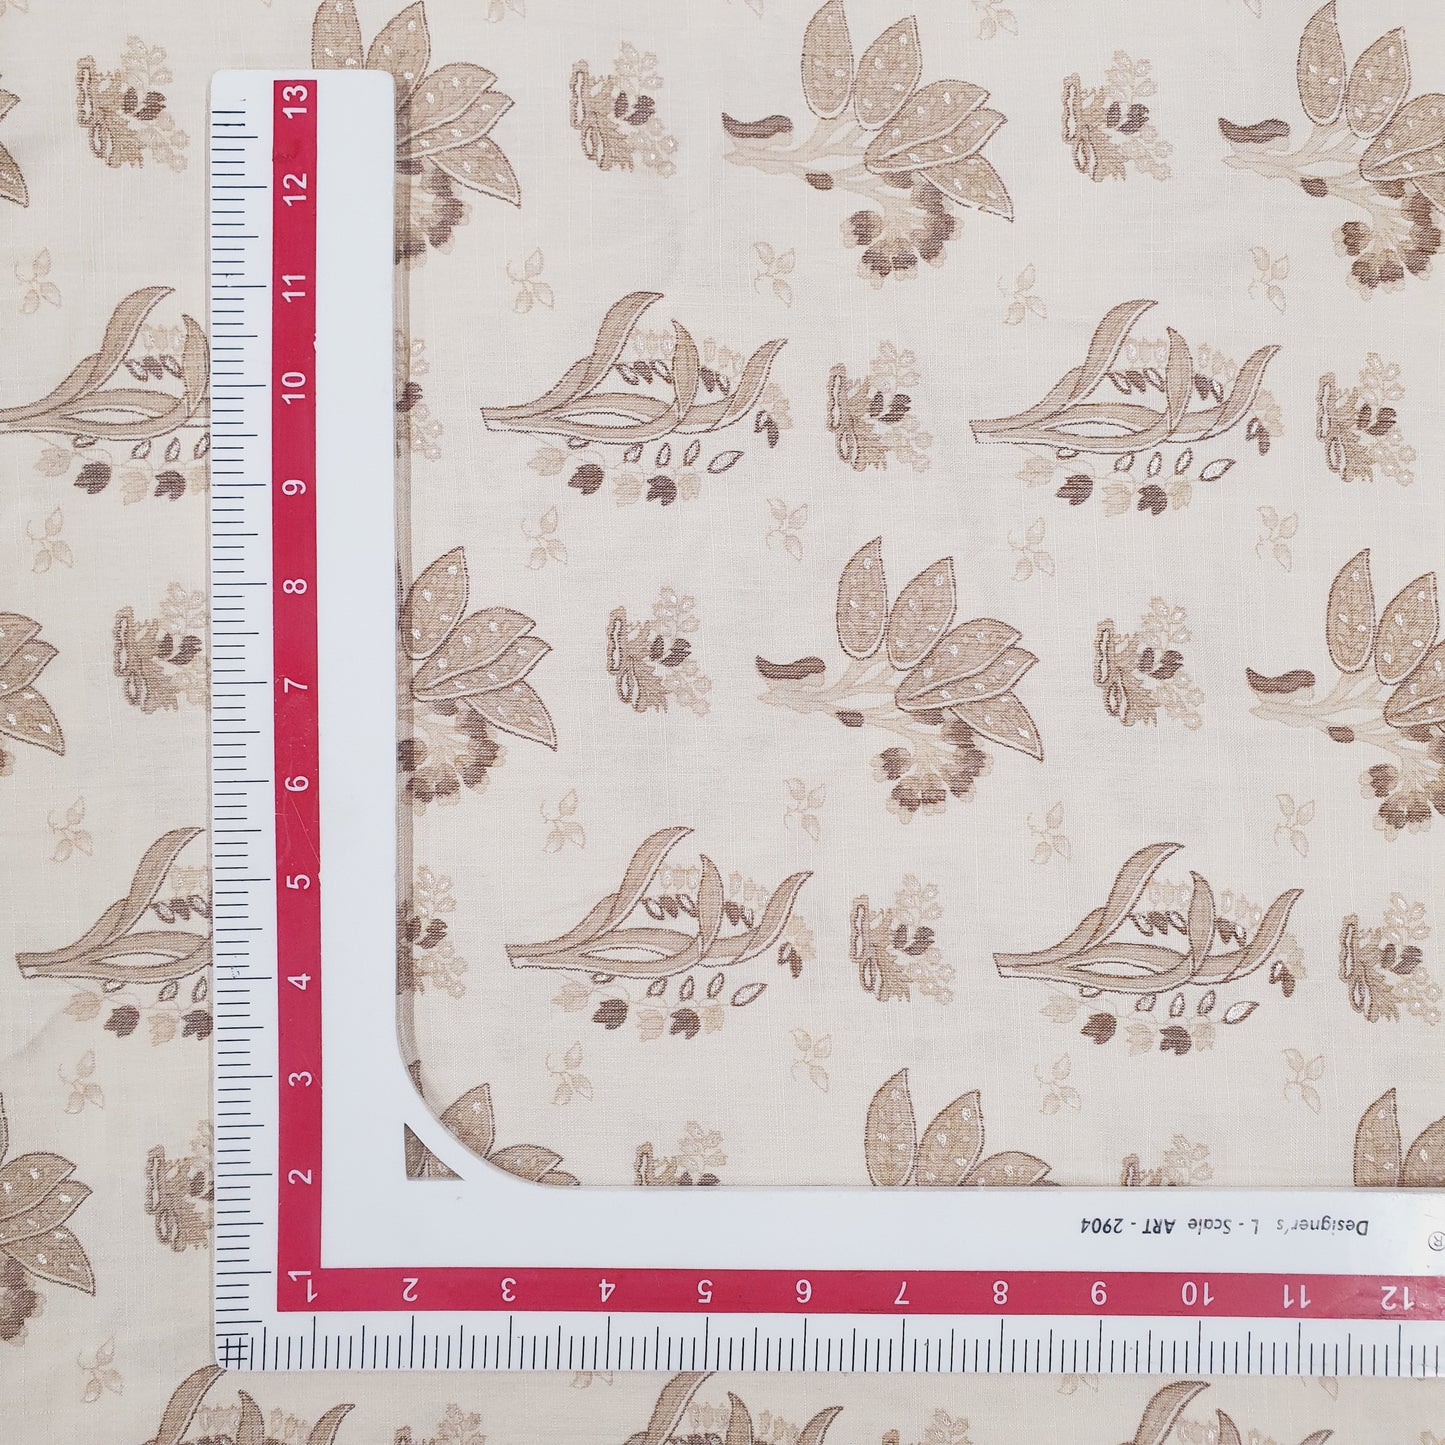 Beige & Brown Floral With Foil Print Rayon Fabric Trade UNO